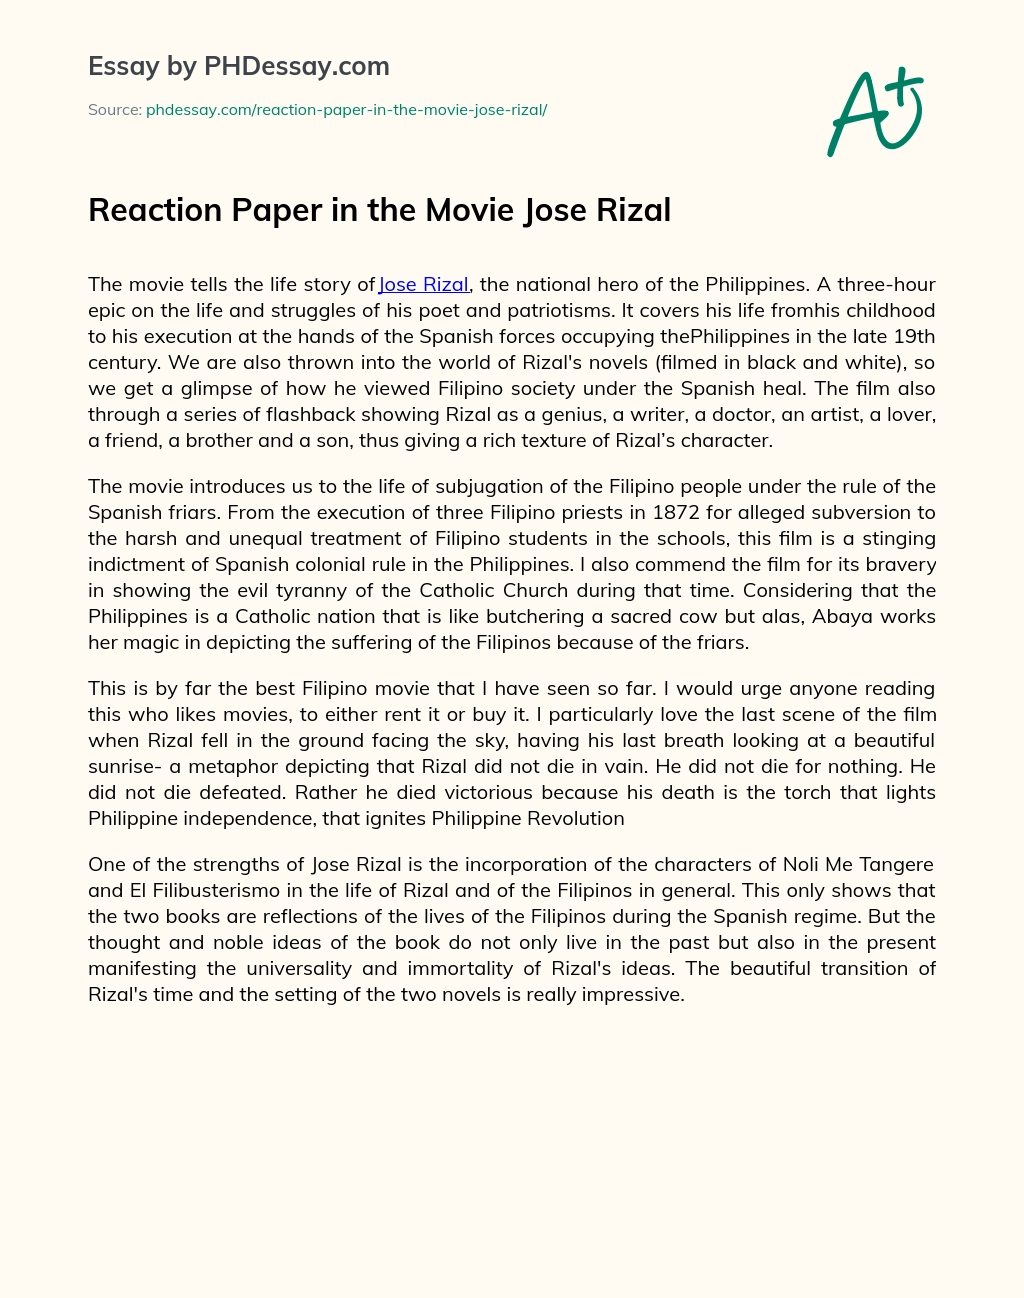 Reaction Paper in the Movie Jose Rizal essay